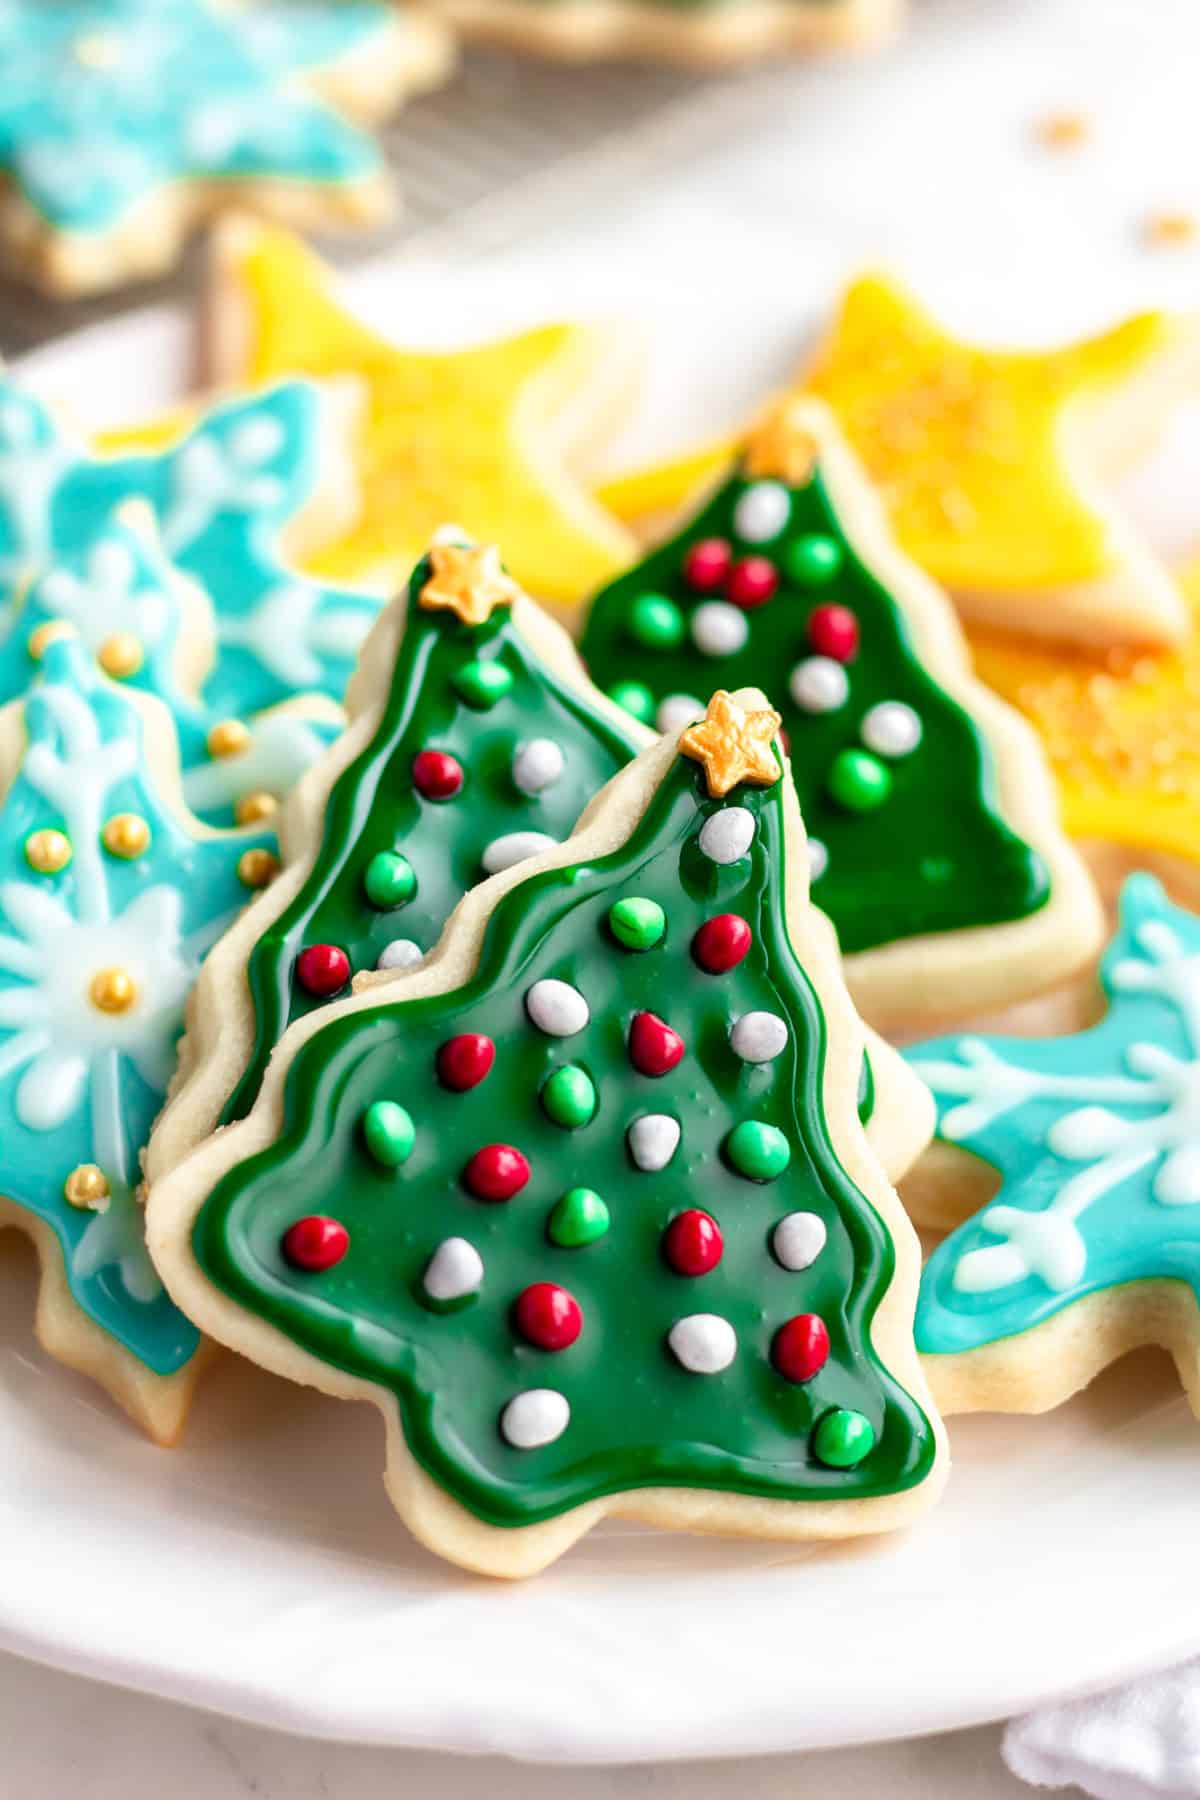 christmas cookies on a plate, showing trees, stars and snowflakes